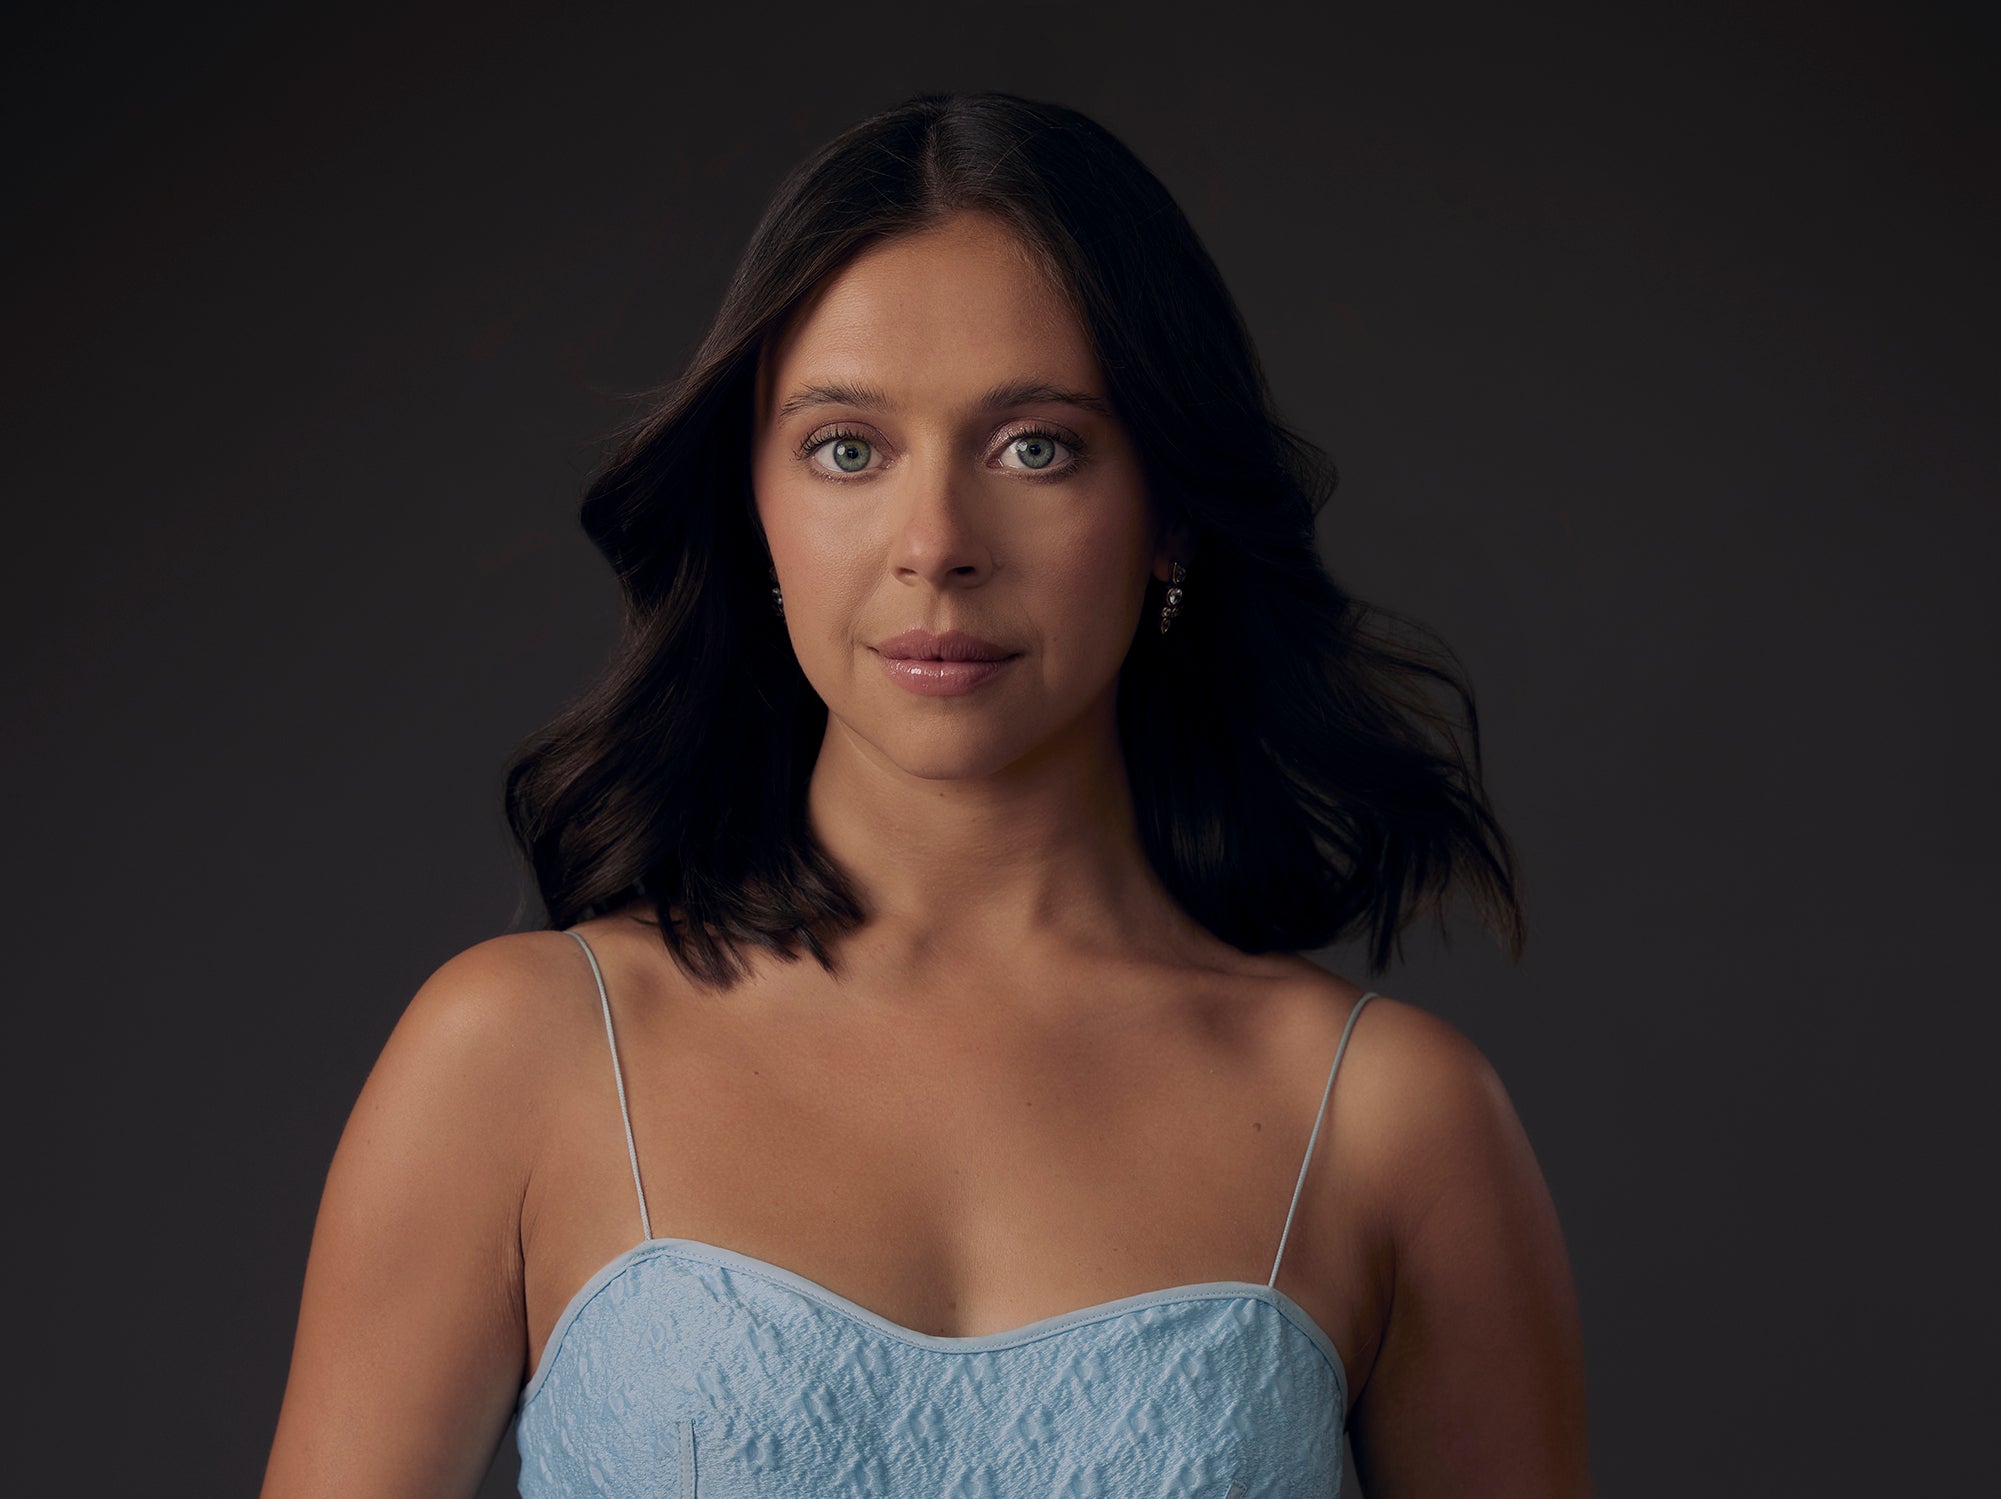 Bel Powley on Botox, nepotism and difficult sex scenes The heroin chic thing is gonna die again, right? The Independent photo